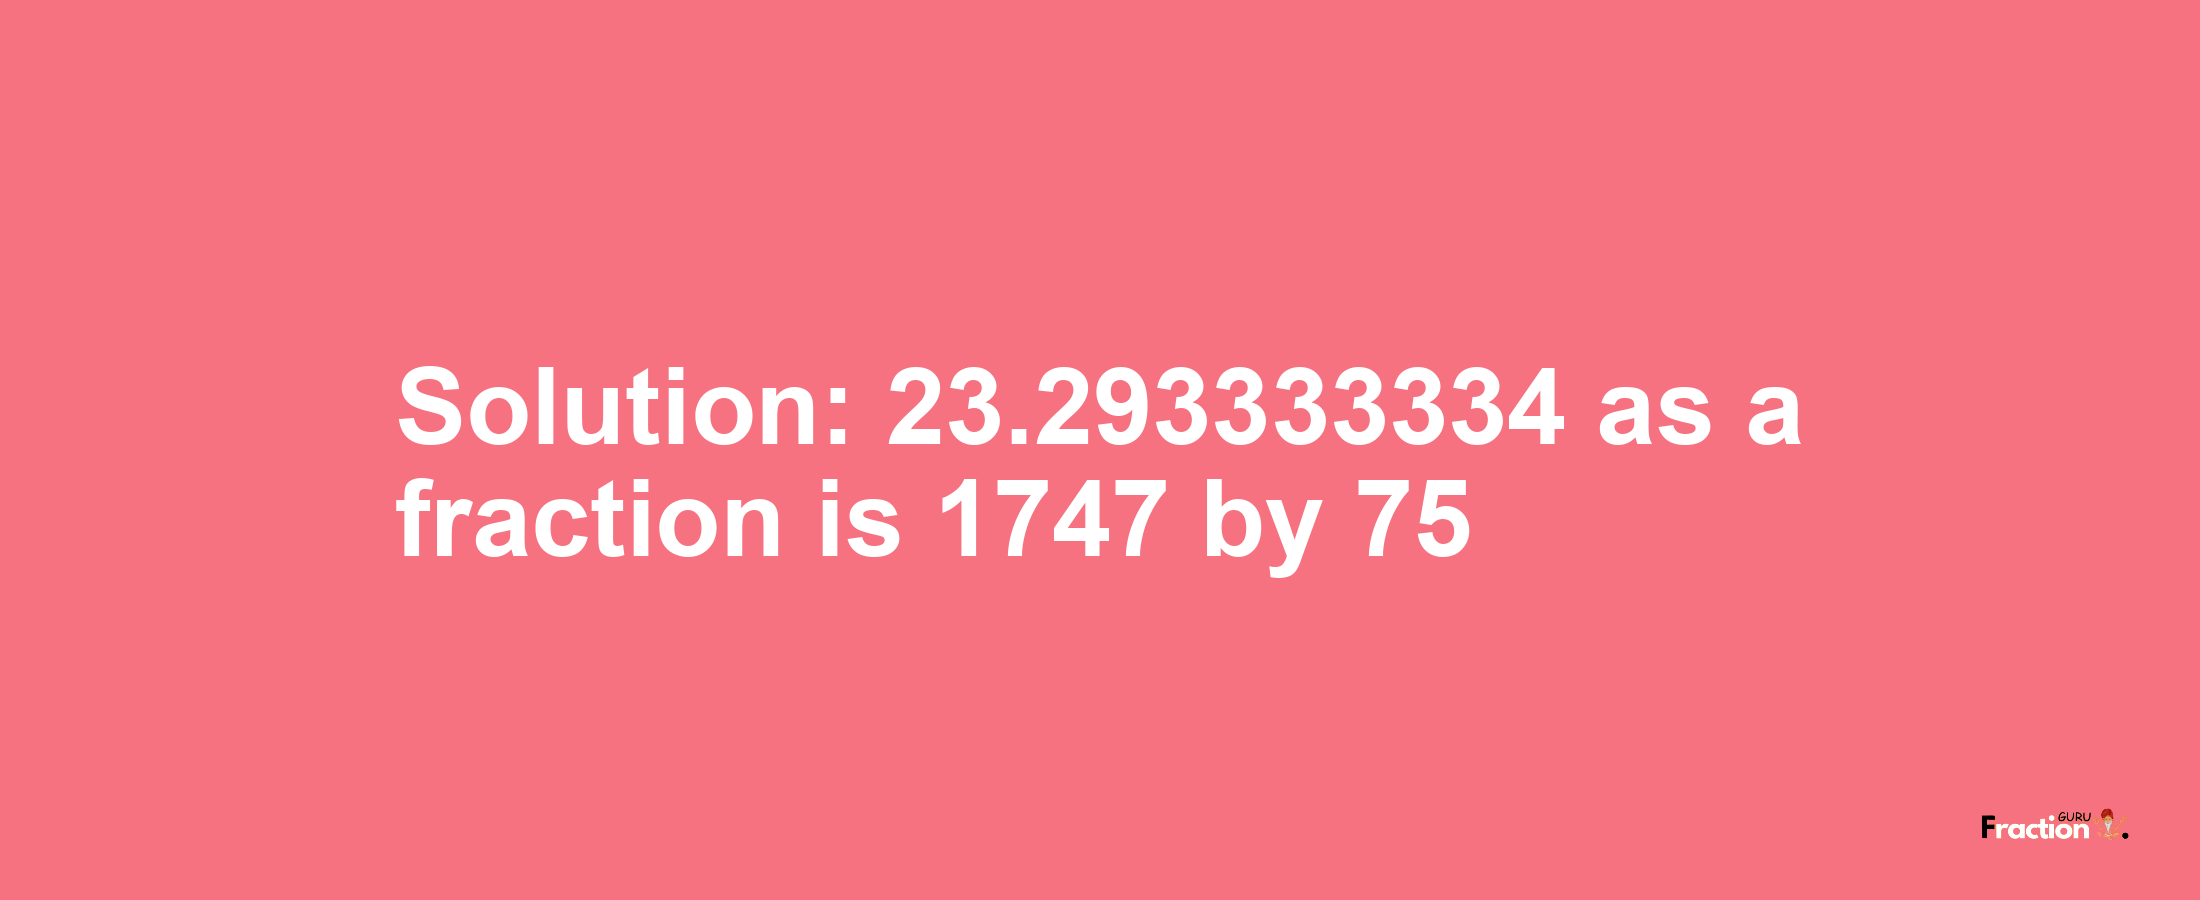 Solution:23.293333334 as a fraction is 1747/75